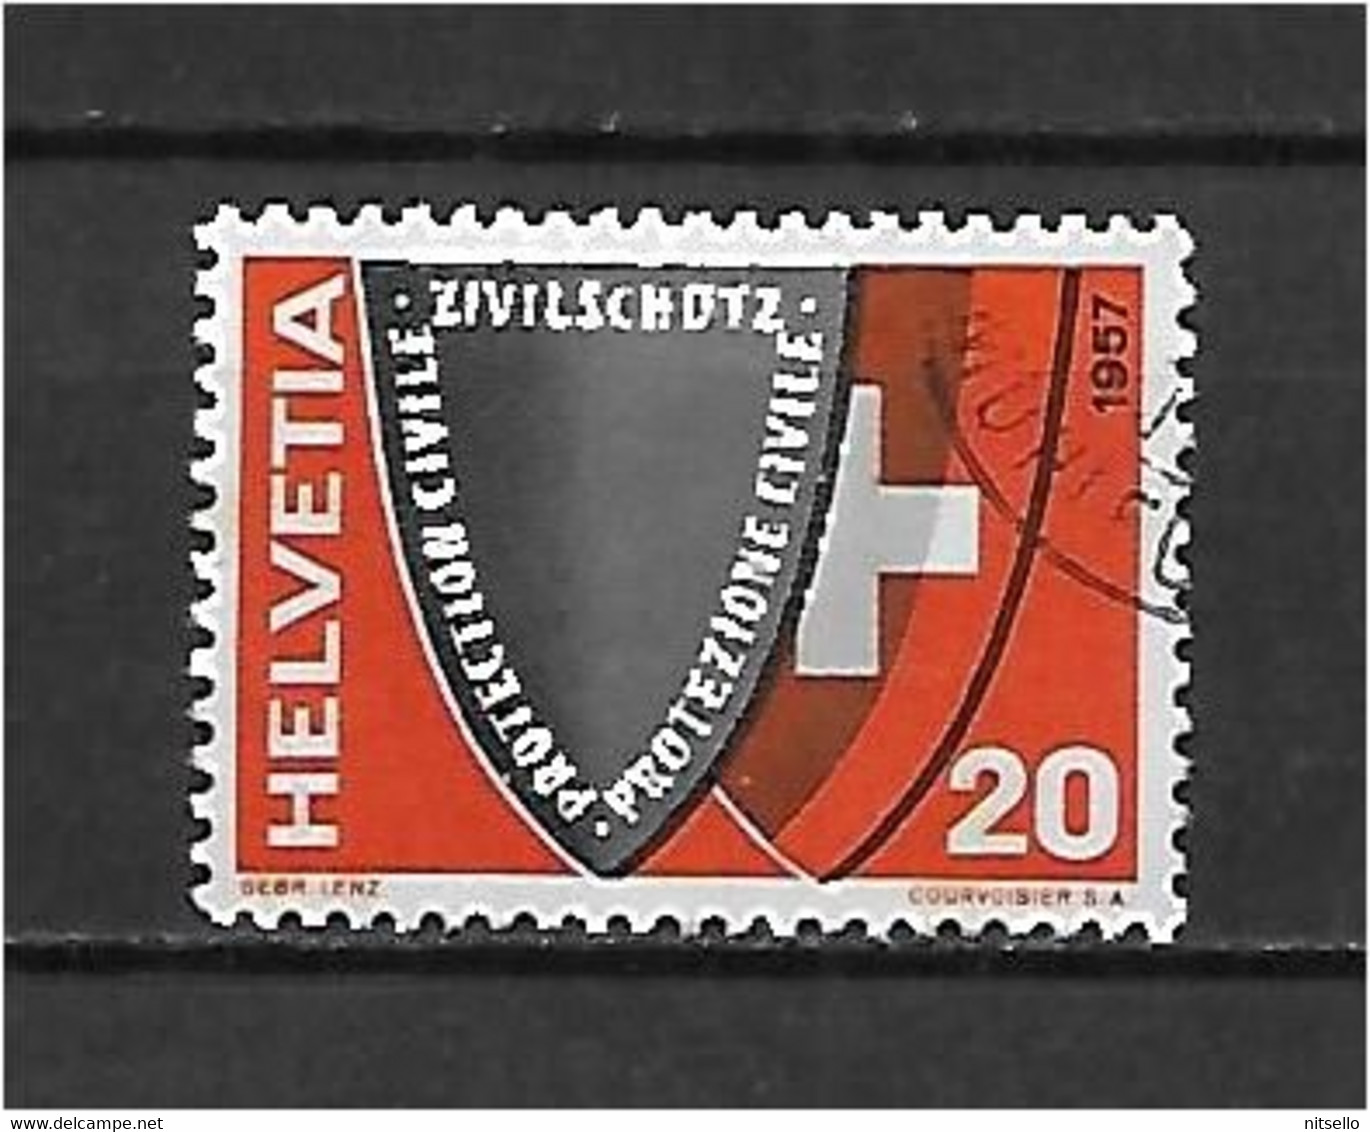 LOTE 1583  ///  SUIZA   YVERT Nº: 588     ¡¡¡ OFERTA - LIQUIDATION - JE LIQUIDE !!! - Used Stamps